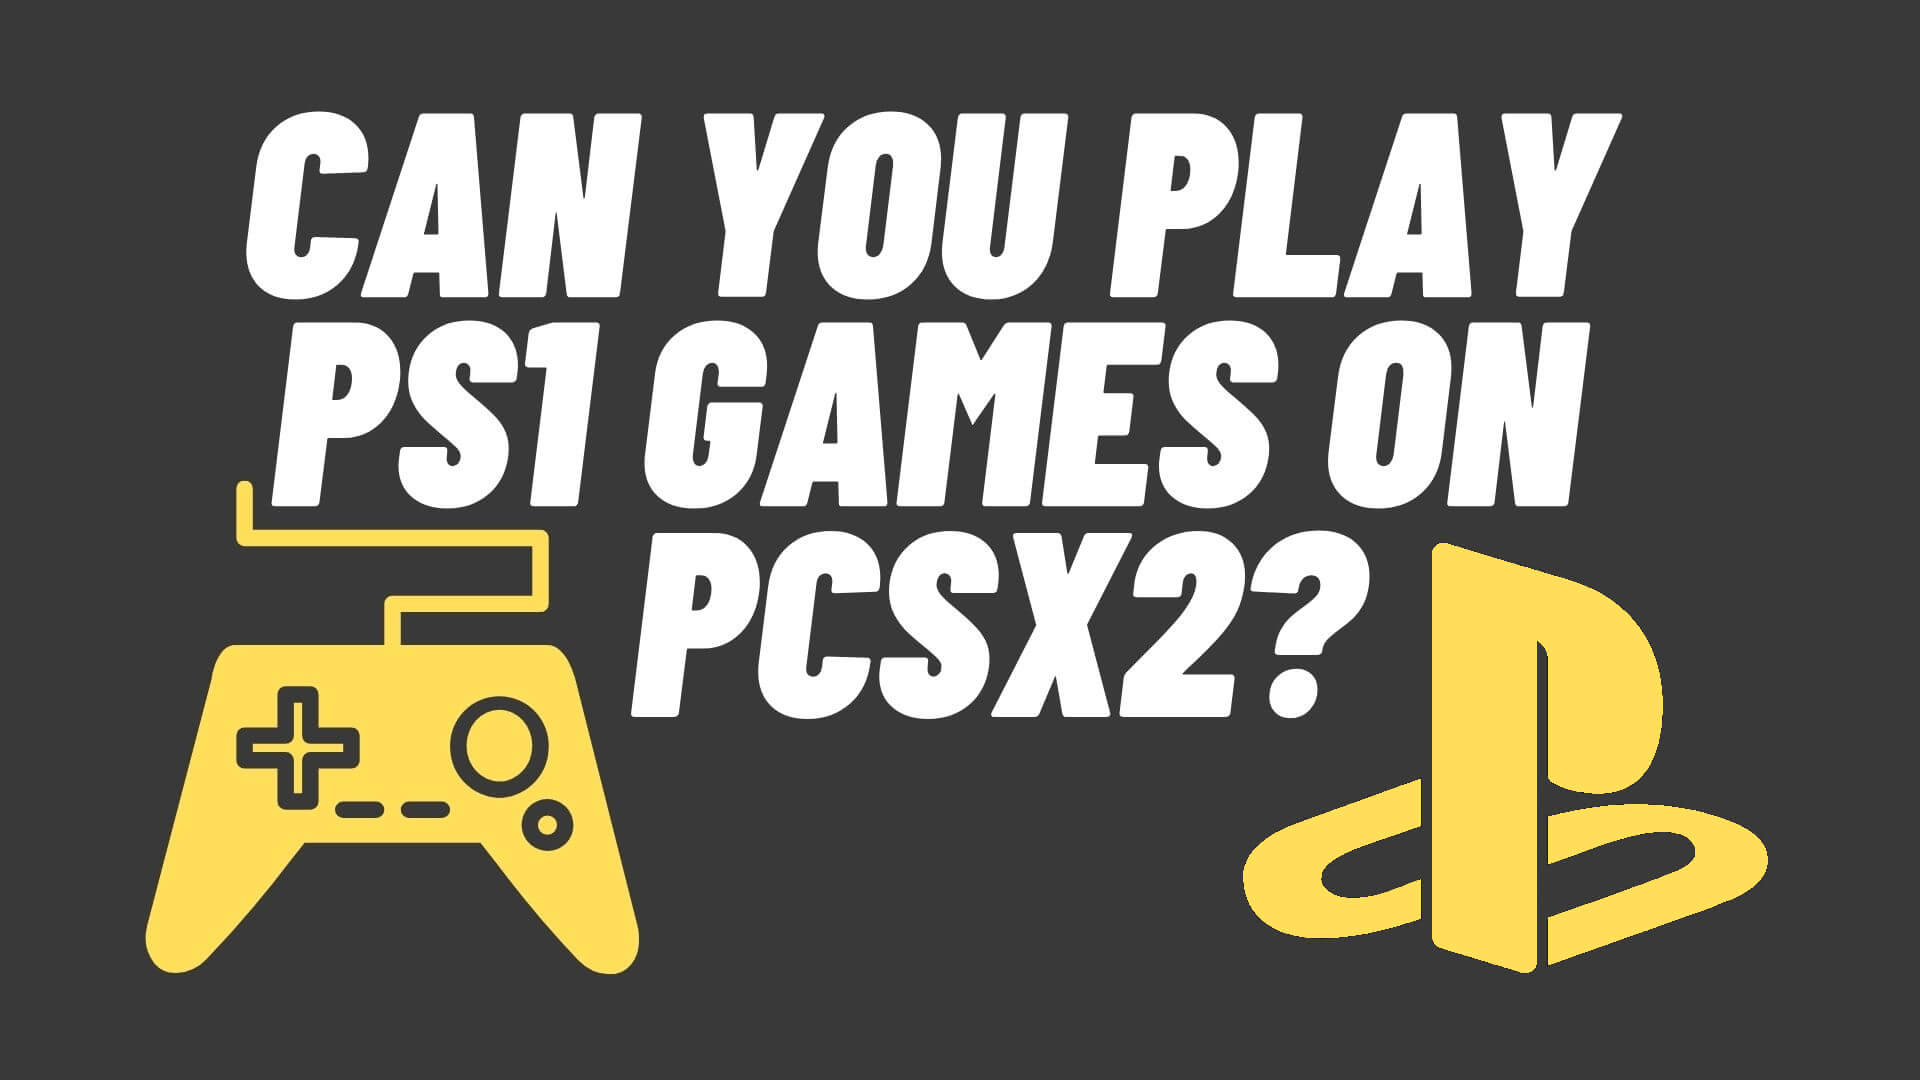 Can You Play PS1 Games On PCSX2?